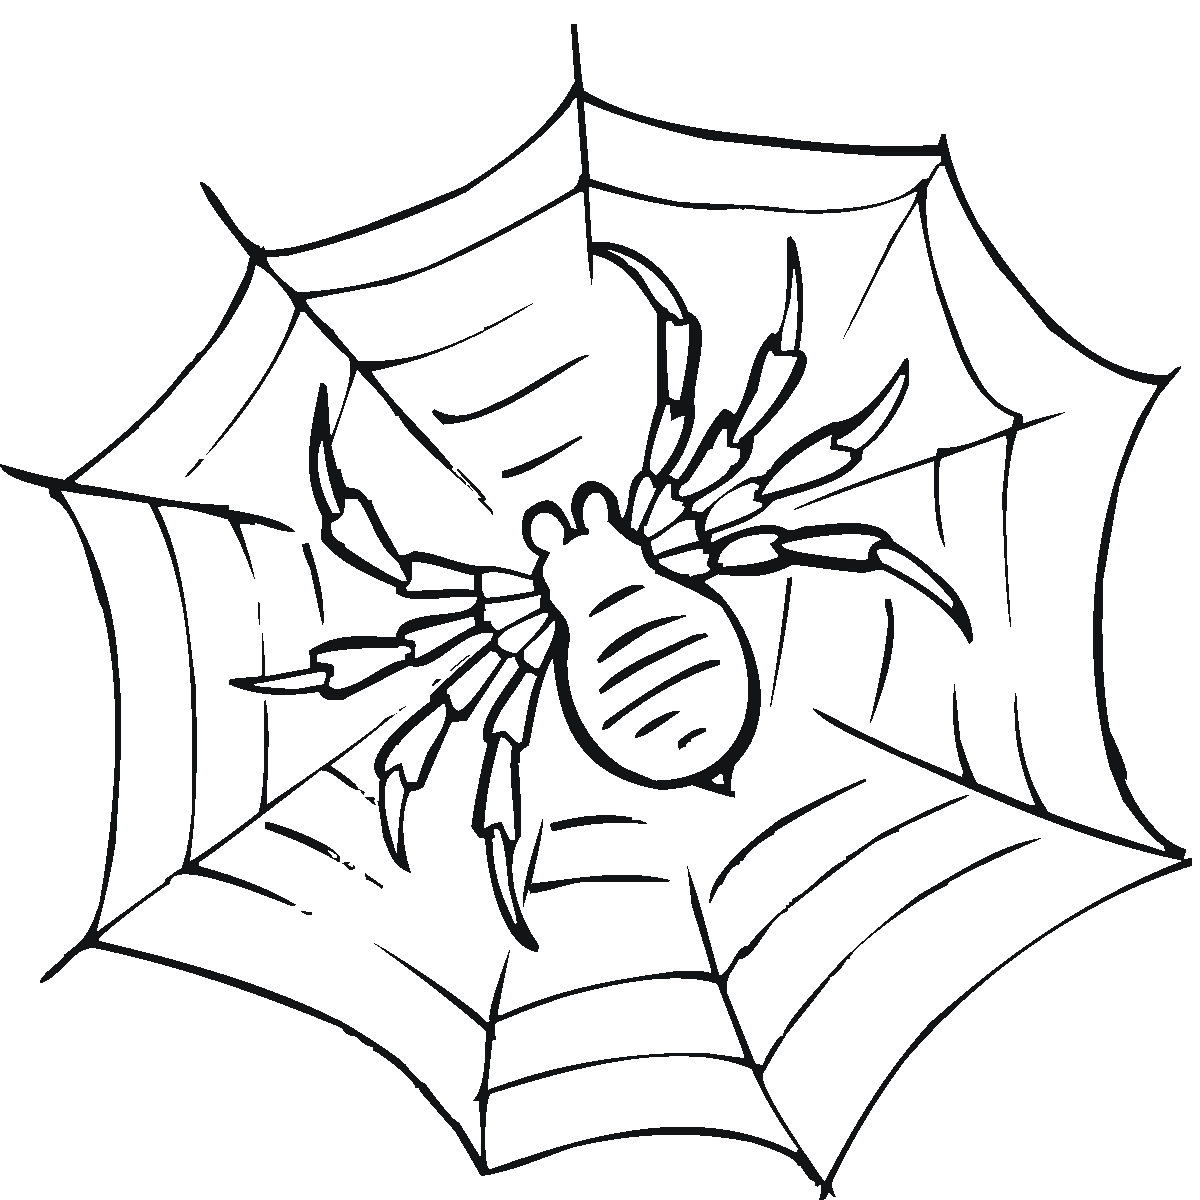 Spider Web coloring #2, Download drawings